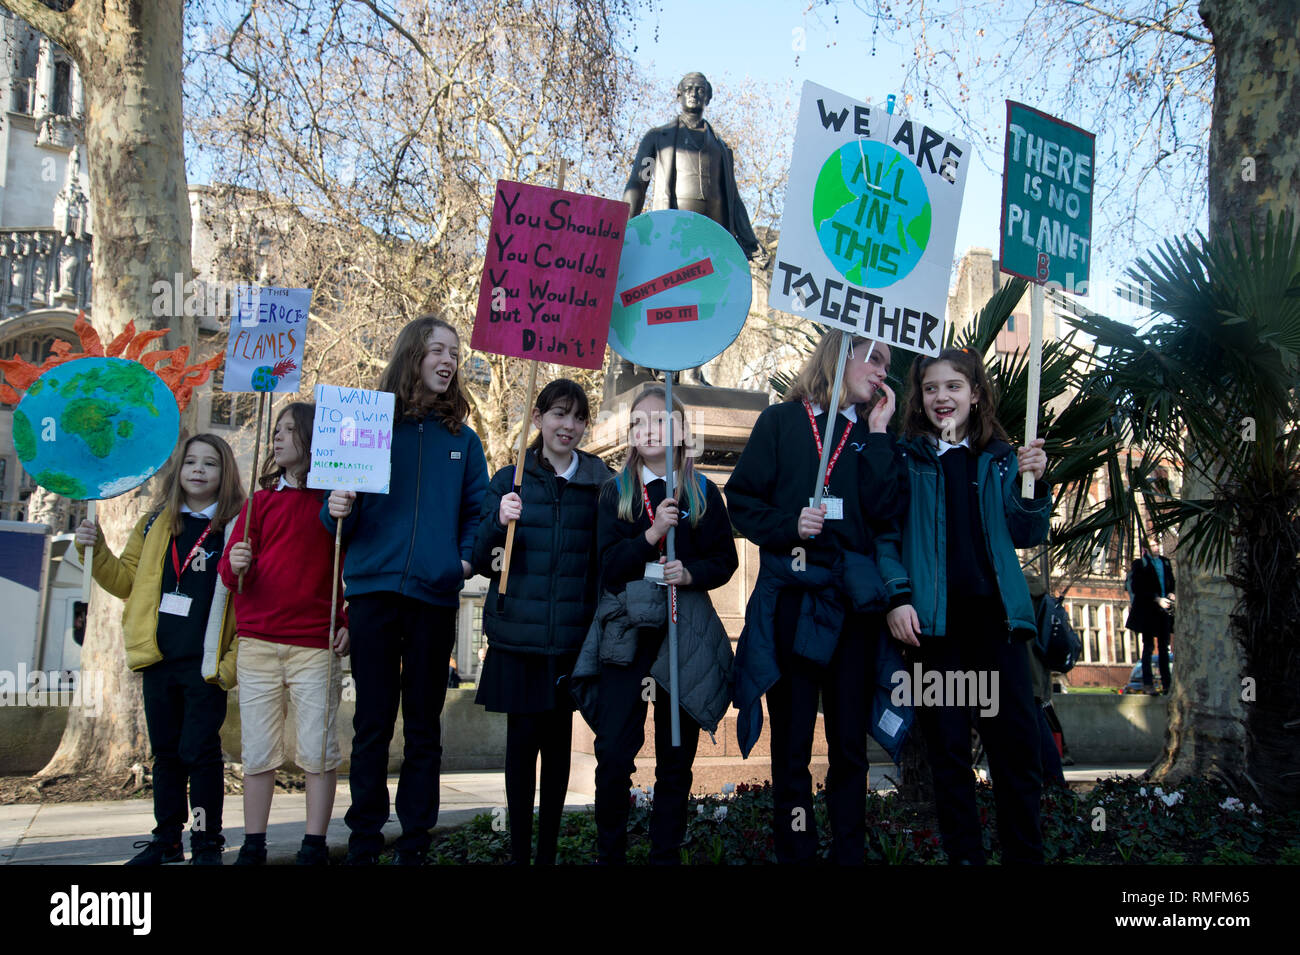 London, UK. 15th Feb, 2019. Thousands of schoolchildren and young people in the UK have taken part in climate strikes, walking out of school to protest at government inaction on climate change as part of a global campaign for action on climate change.The school strikes have been inspired by young Swedish activist Greta Thurnberg who since August 2018 has been protesting on Fridays. In London several thousands children and students gathered in Parliament Square, Westminster. Credit: Jenny Matthews/Alamy Live News Stock Photo